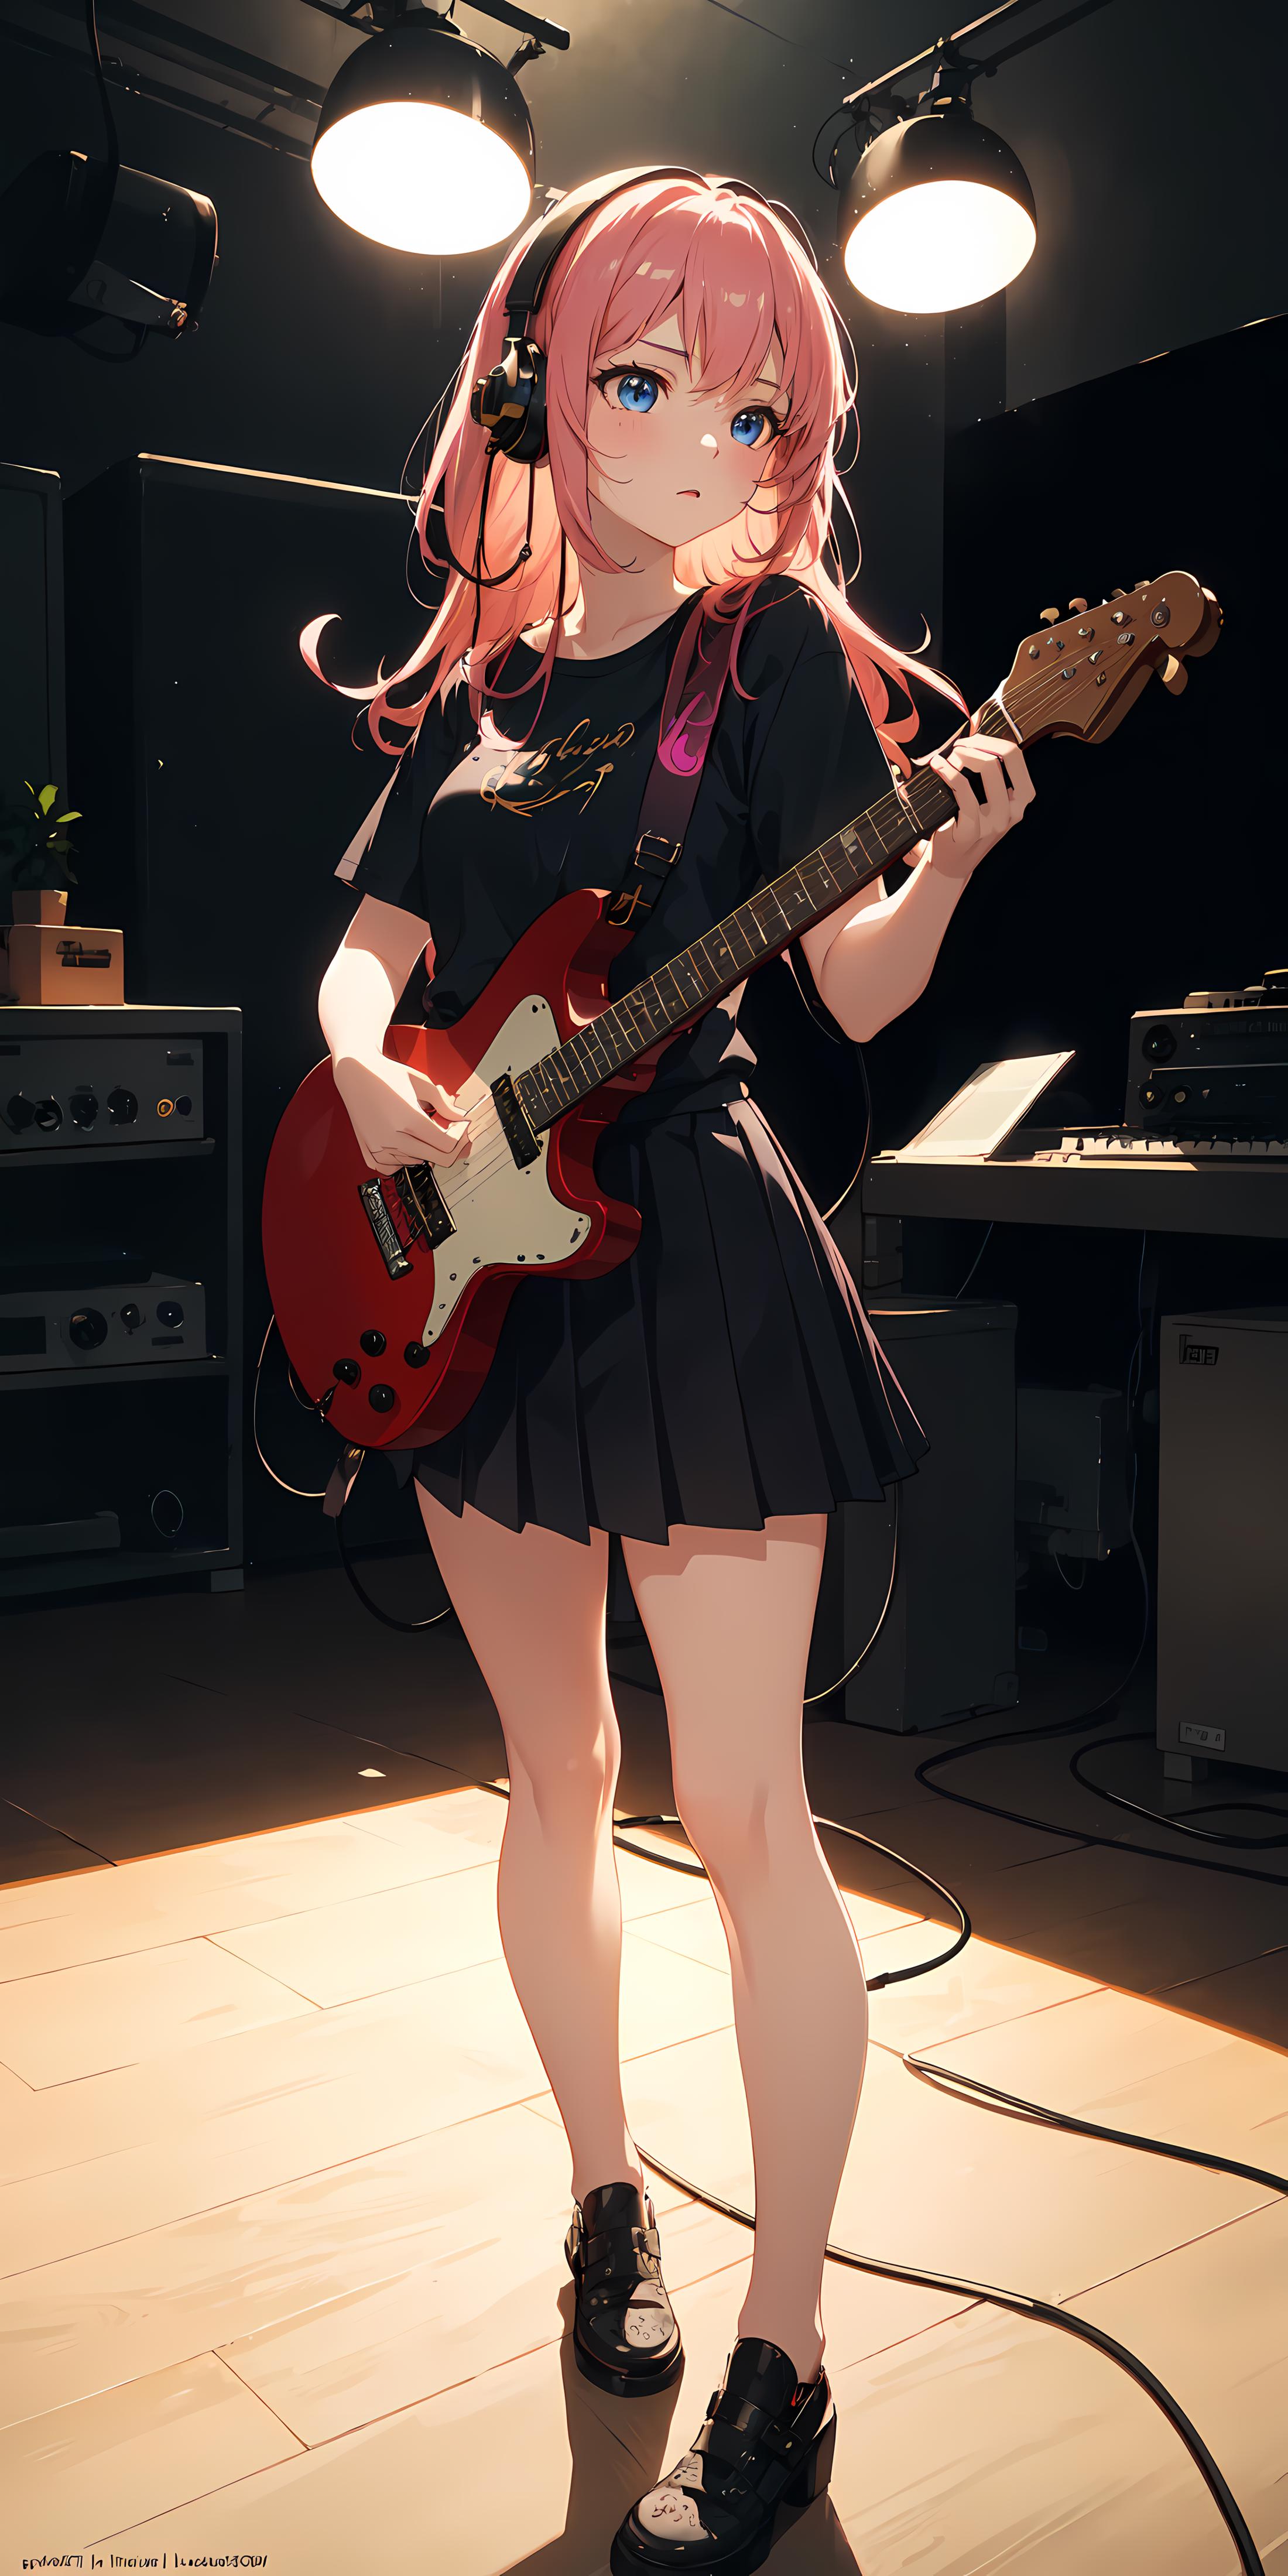 Cartoon Image of a Girl Playing Guitar in a Black and Red Outfit